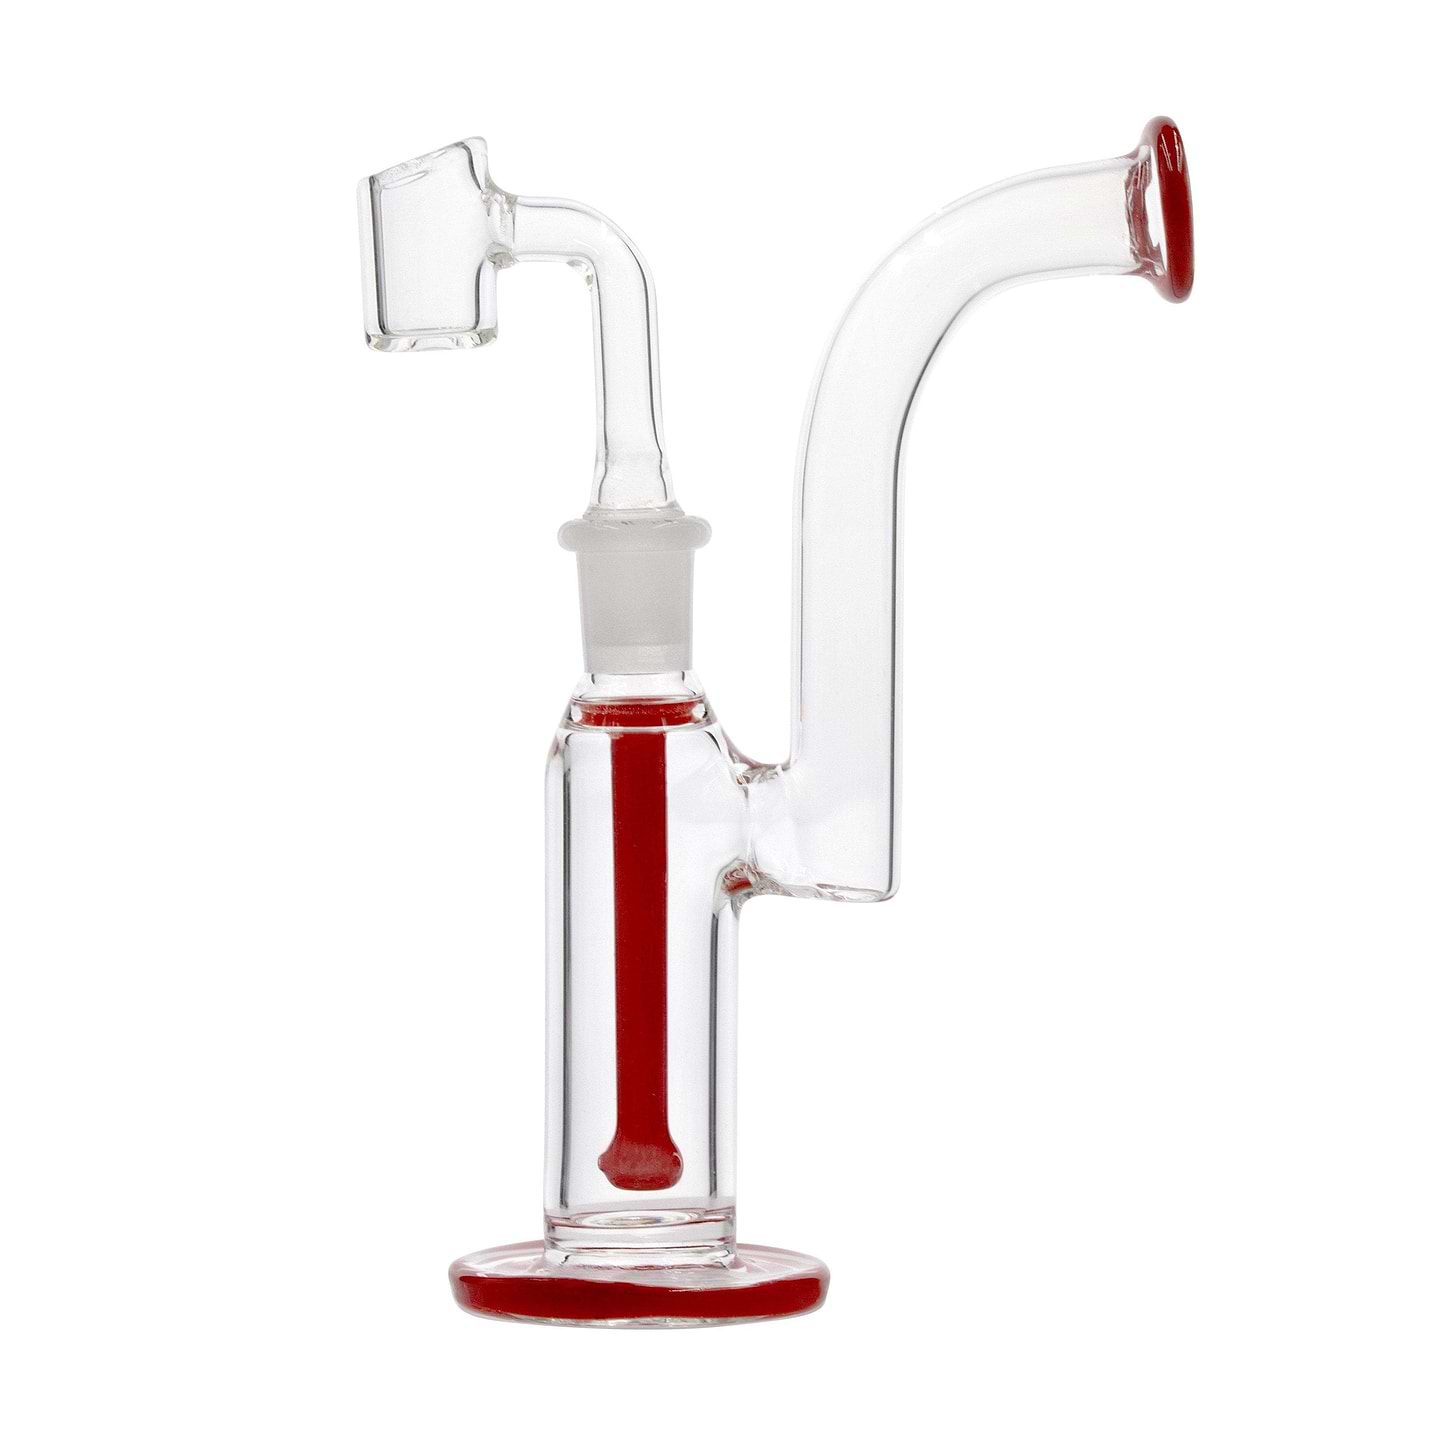 6.5-inch portable glass dabber mini dab rig saxophone design jazzy musical instrument look fun red